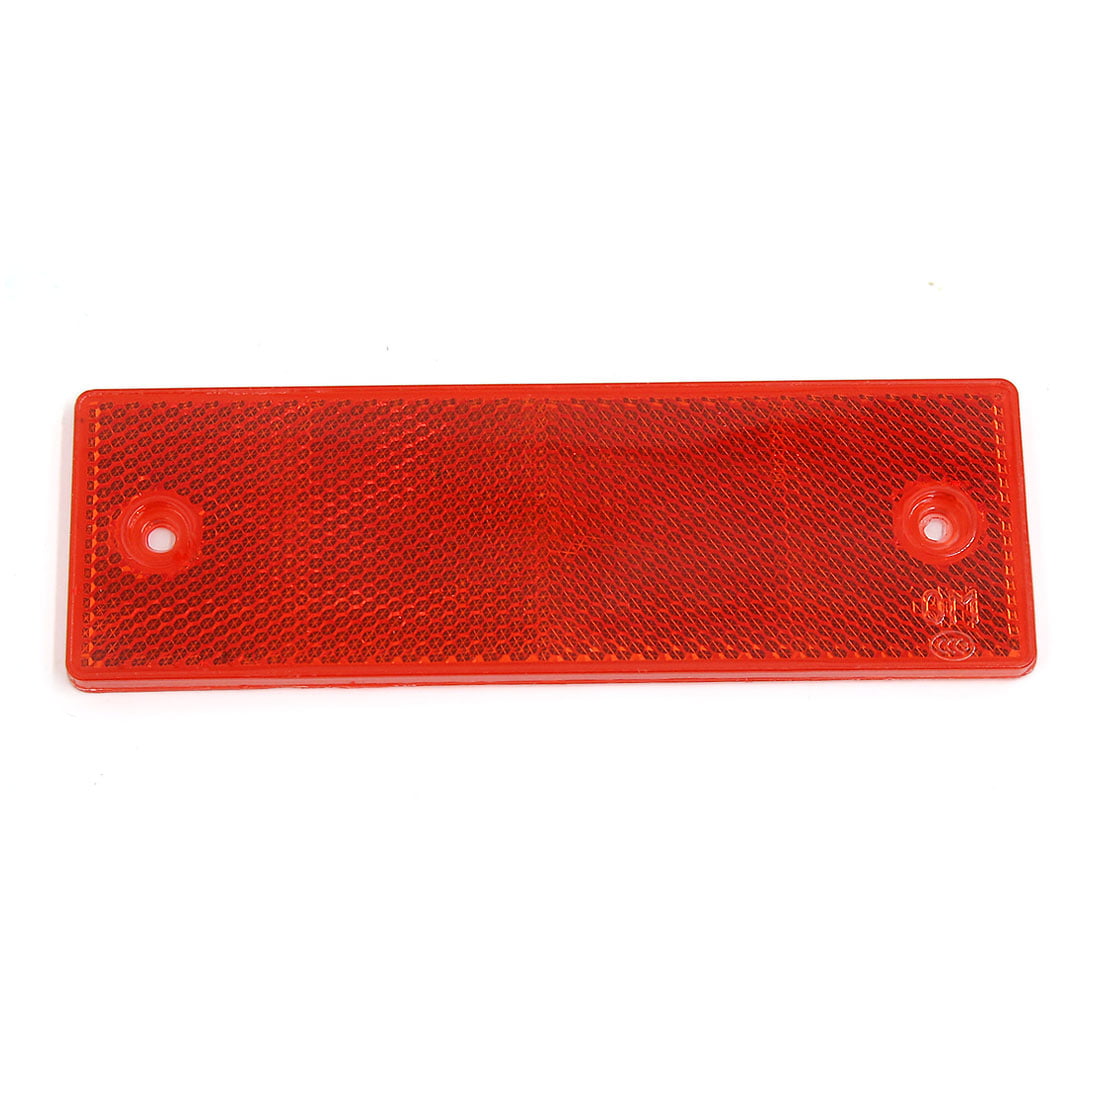 sourcingmap Universal Truck Car Red Plastic Adhesiive Reflective Plate w/o Holes 2PCS